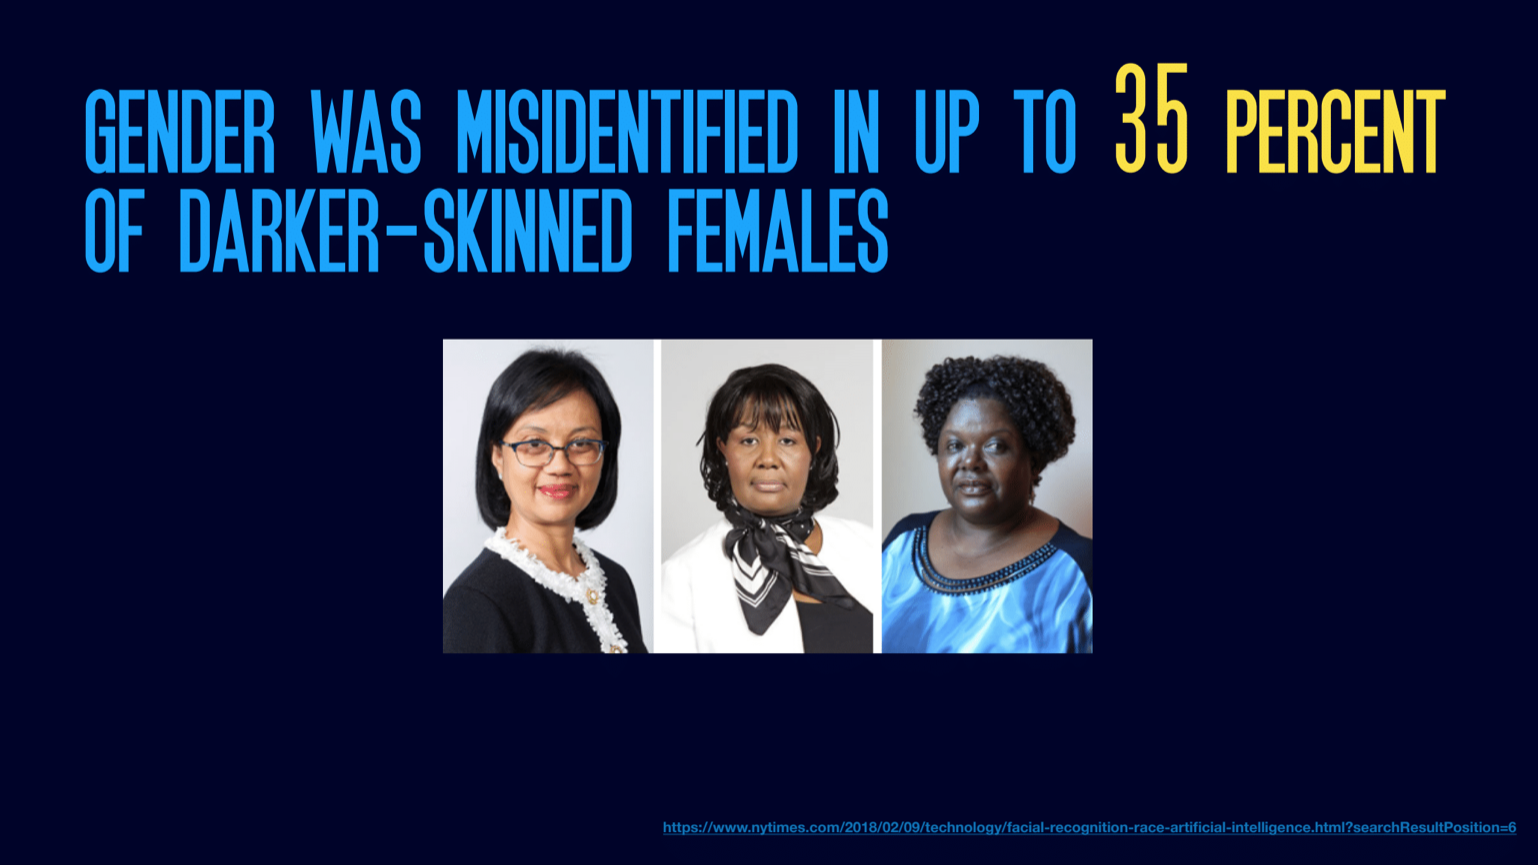 Facial recognition software misidentified gender in up to 35 percent of darker skinned females.